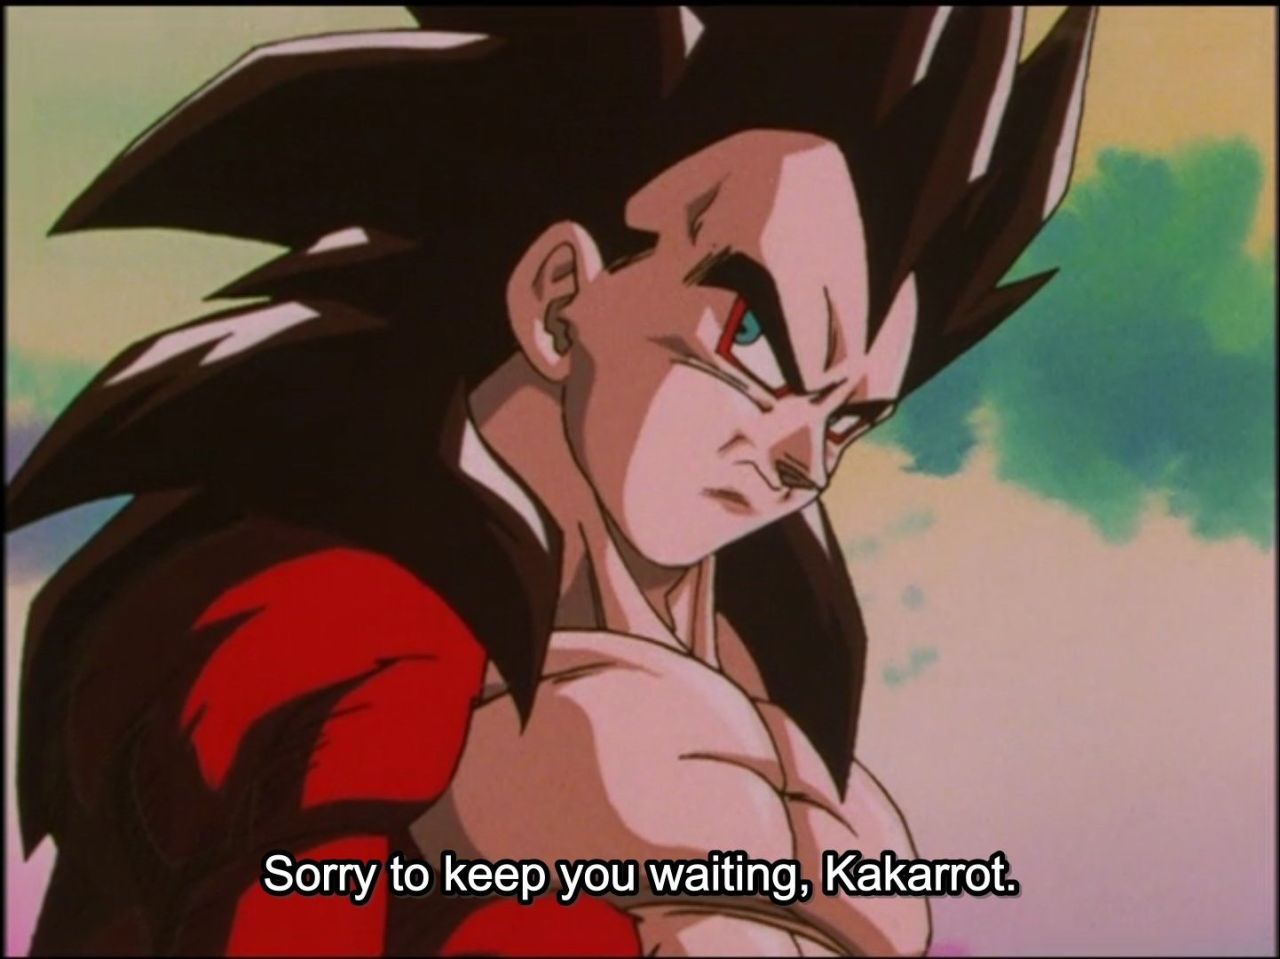 While rewatching GT I've came to the conclusion that Gogeta SSJ4